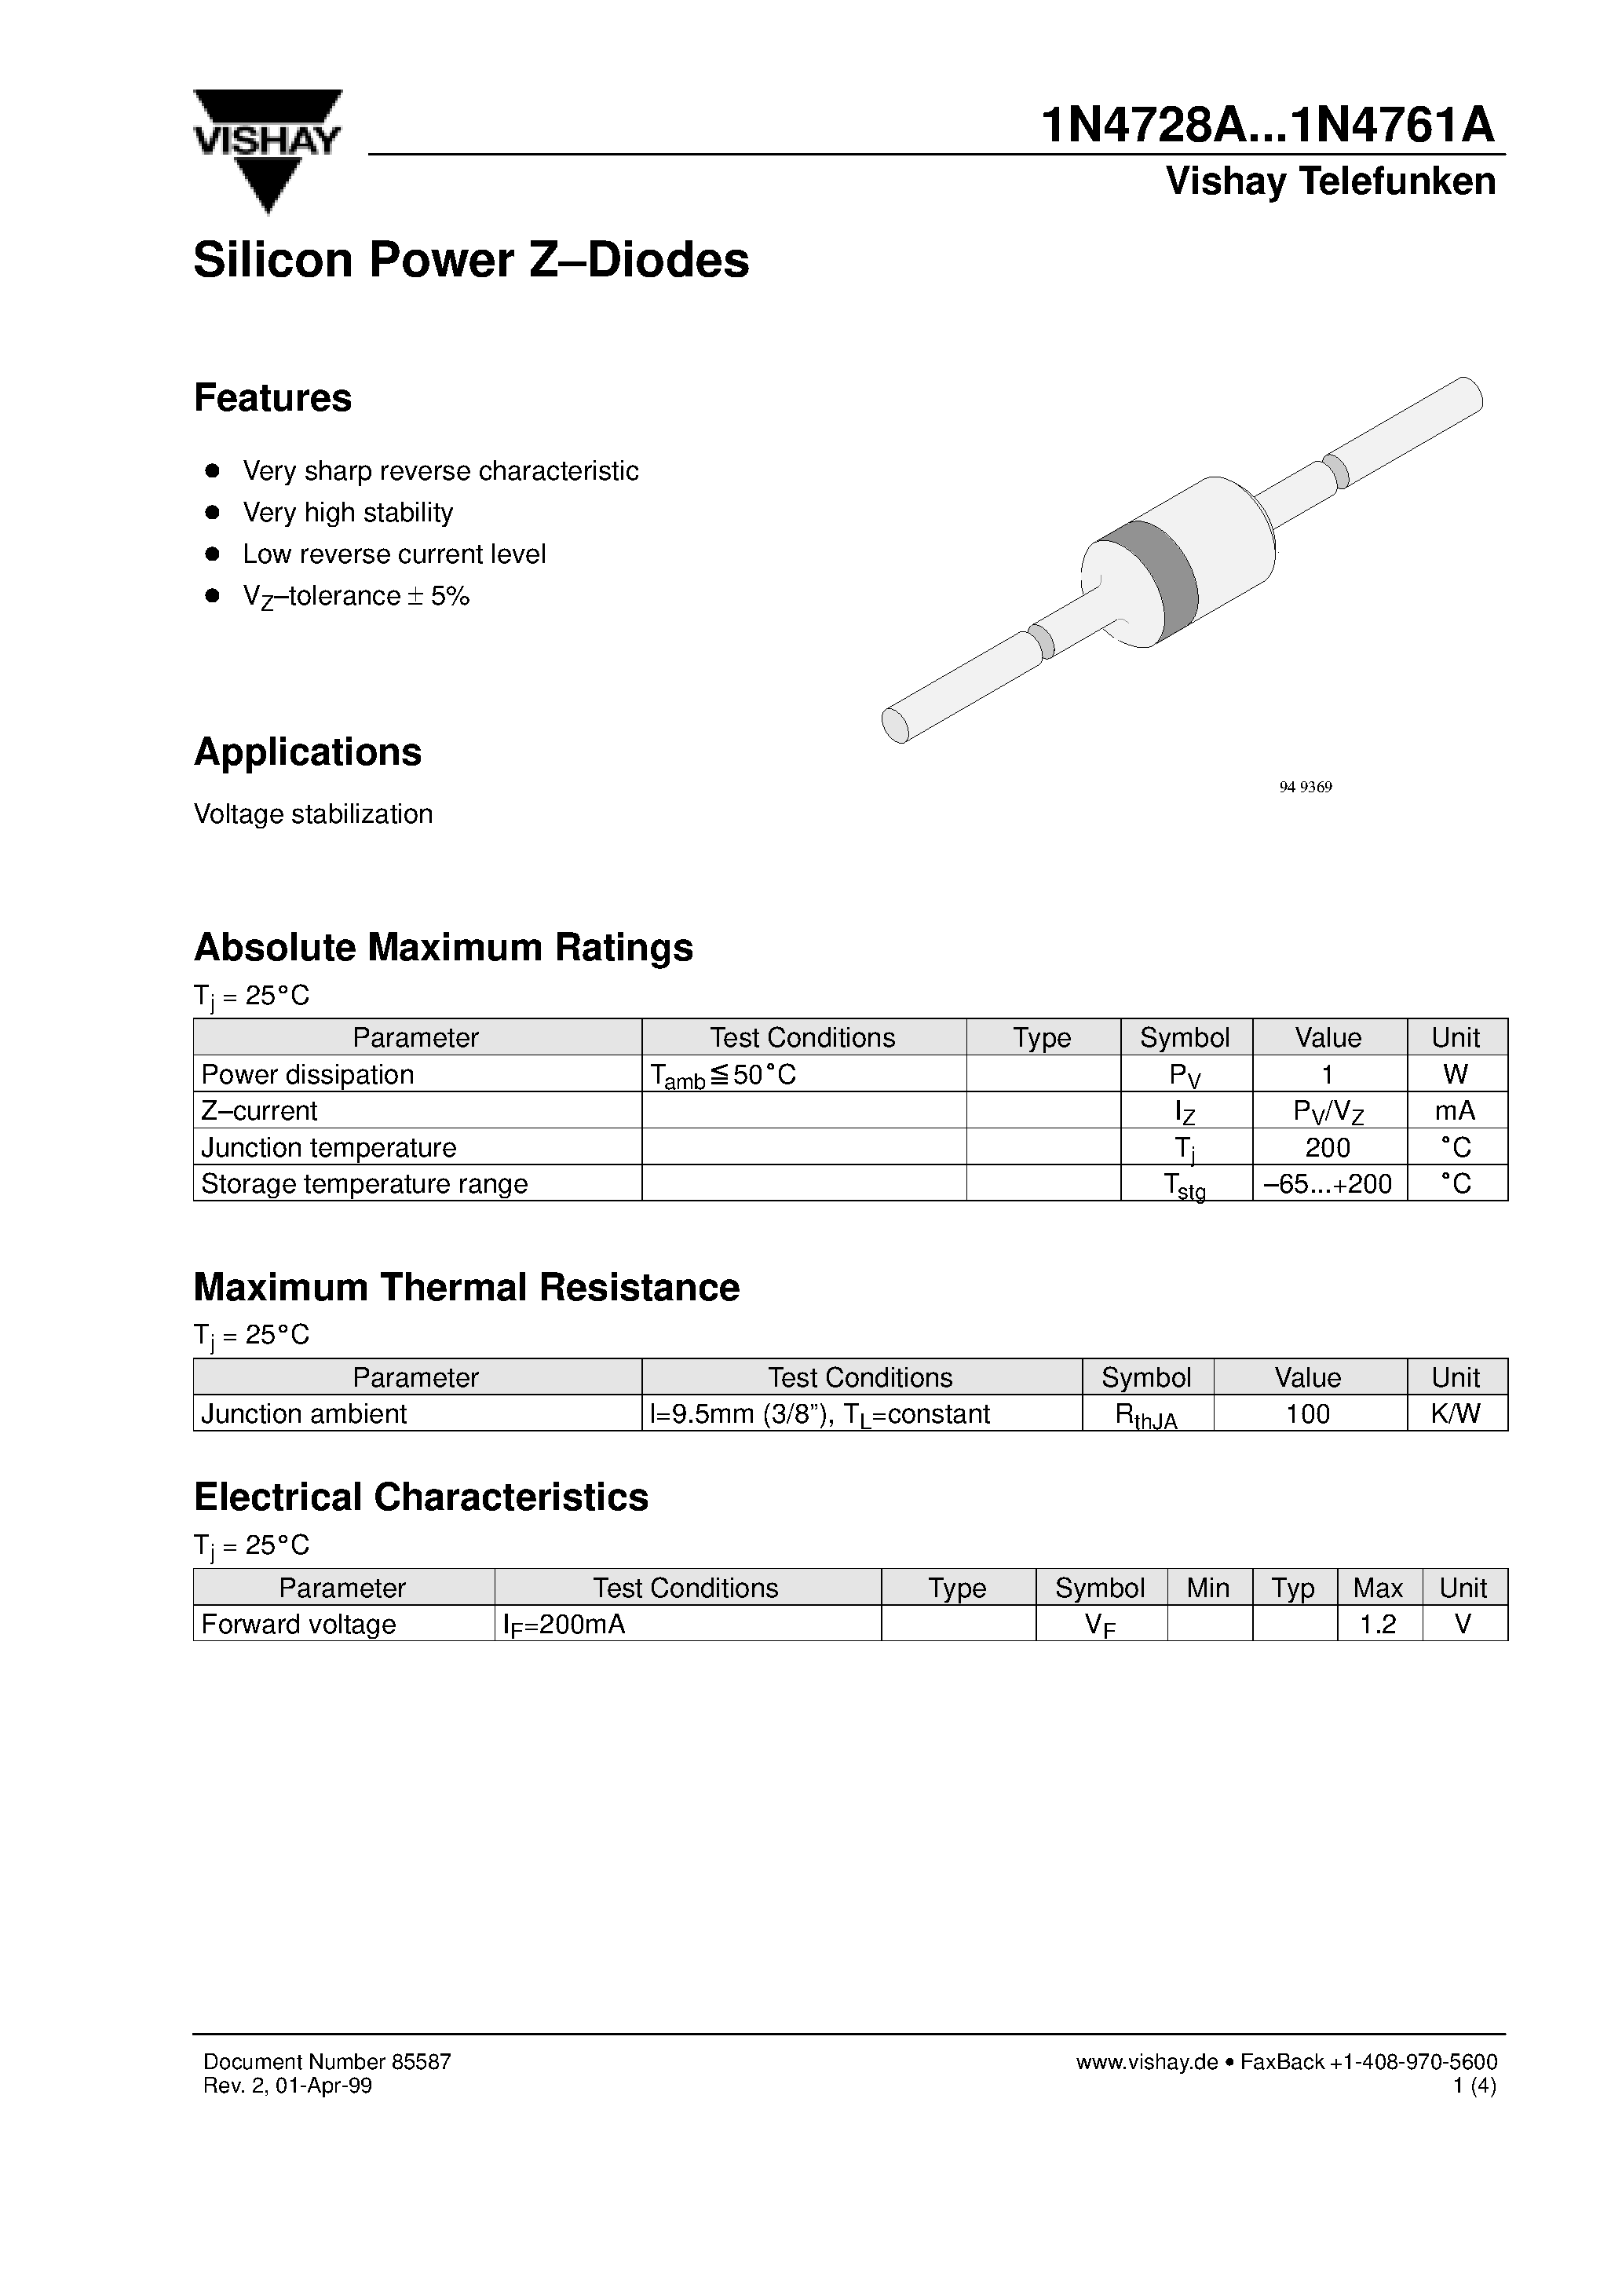 Даташит 1N4757A - Silicon Power Z-Diodes страница 1